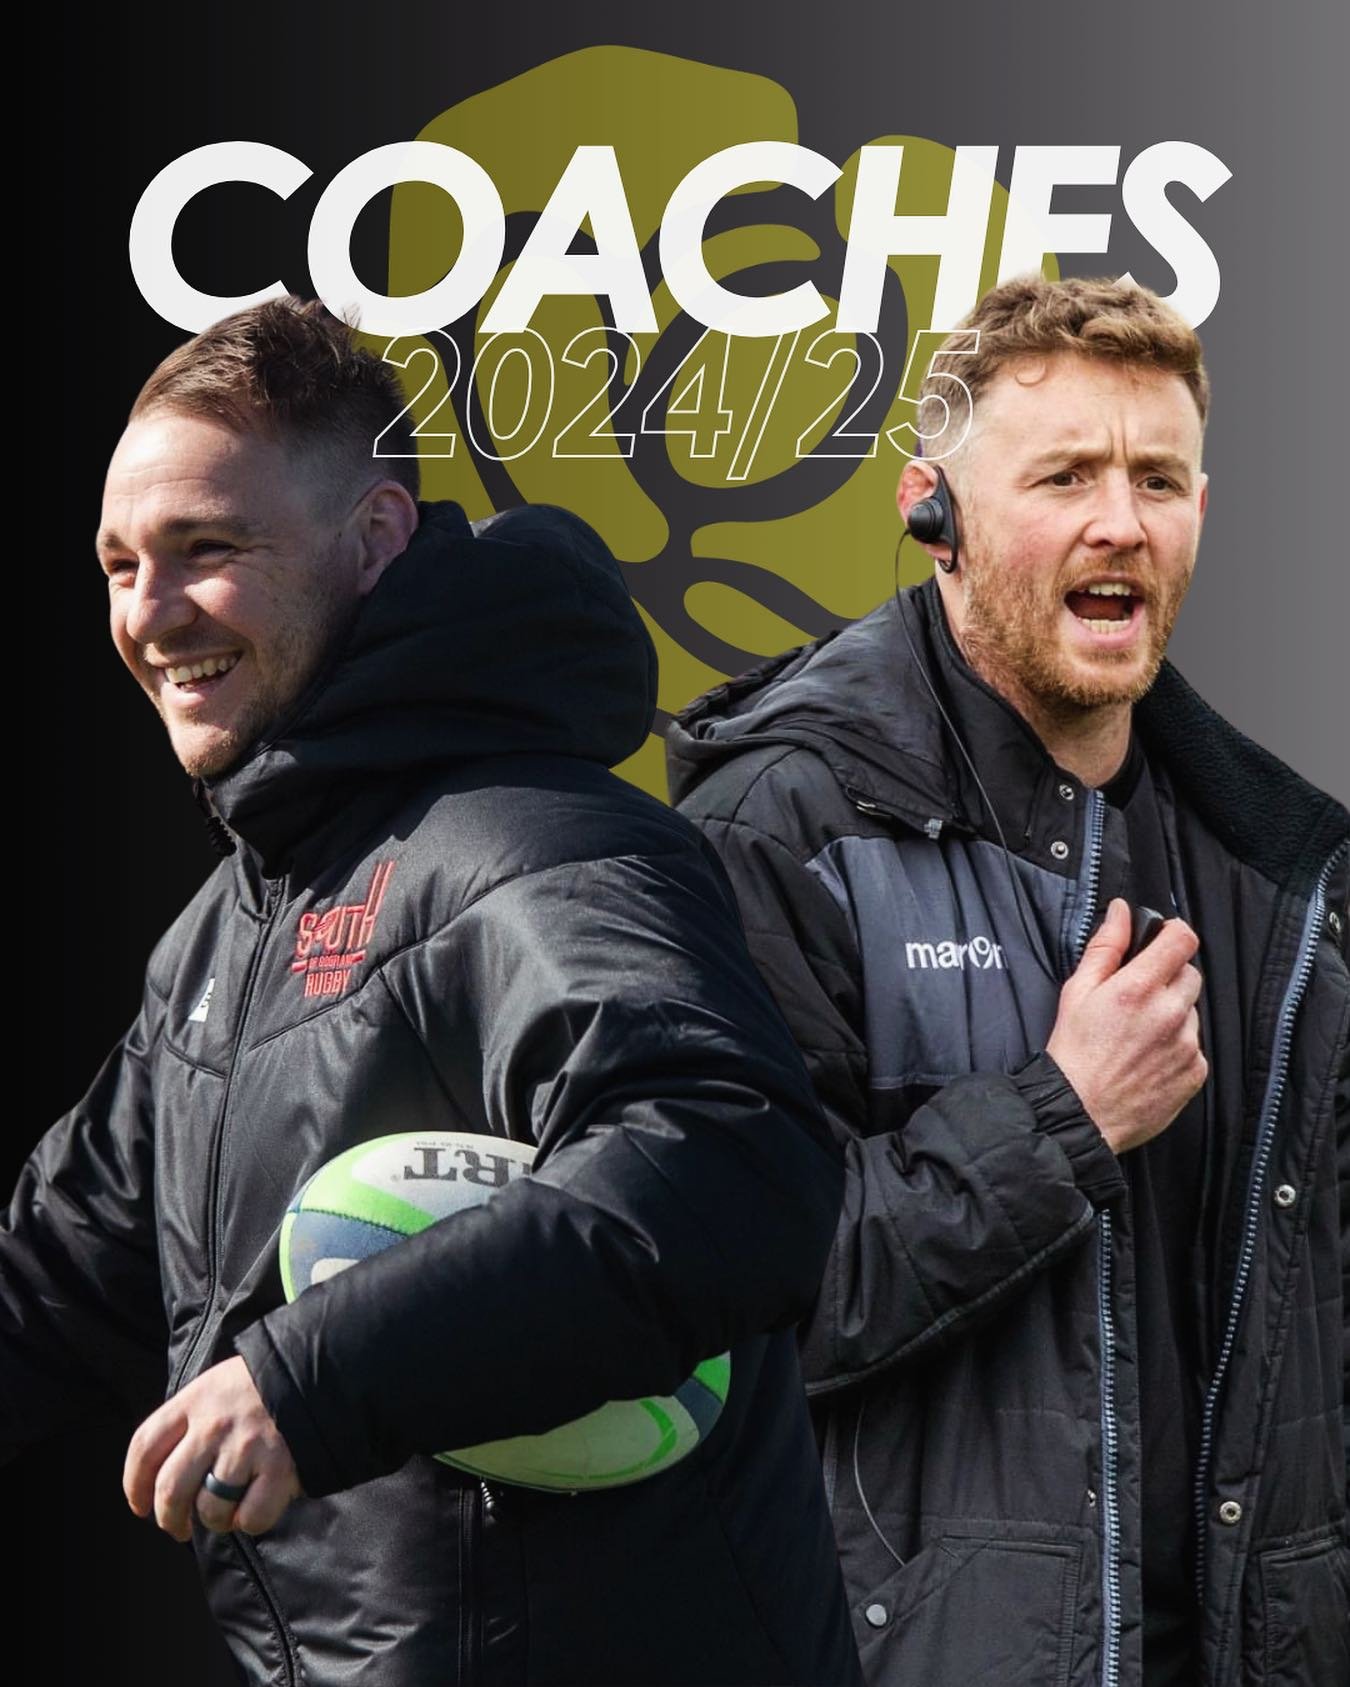 𝘾𝙤𝙖𝙘𝙝𝙚𝙨 𝙪𝙥𝙙𝙖𝙩𝙚 || Melrose Rugby are delighted to announce Iain Chisholm &amp; Scott Wight as Co-Coaches ahead of the 2024/25 season.

Following the conclusion of the Super Series Sprint Season, Wight will join current Head Coach Chisholm